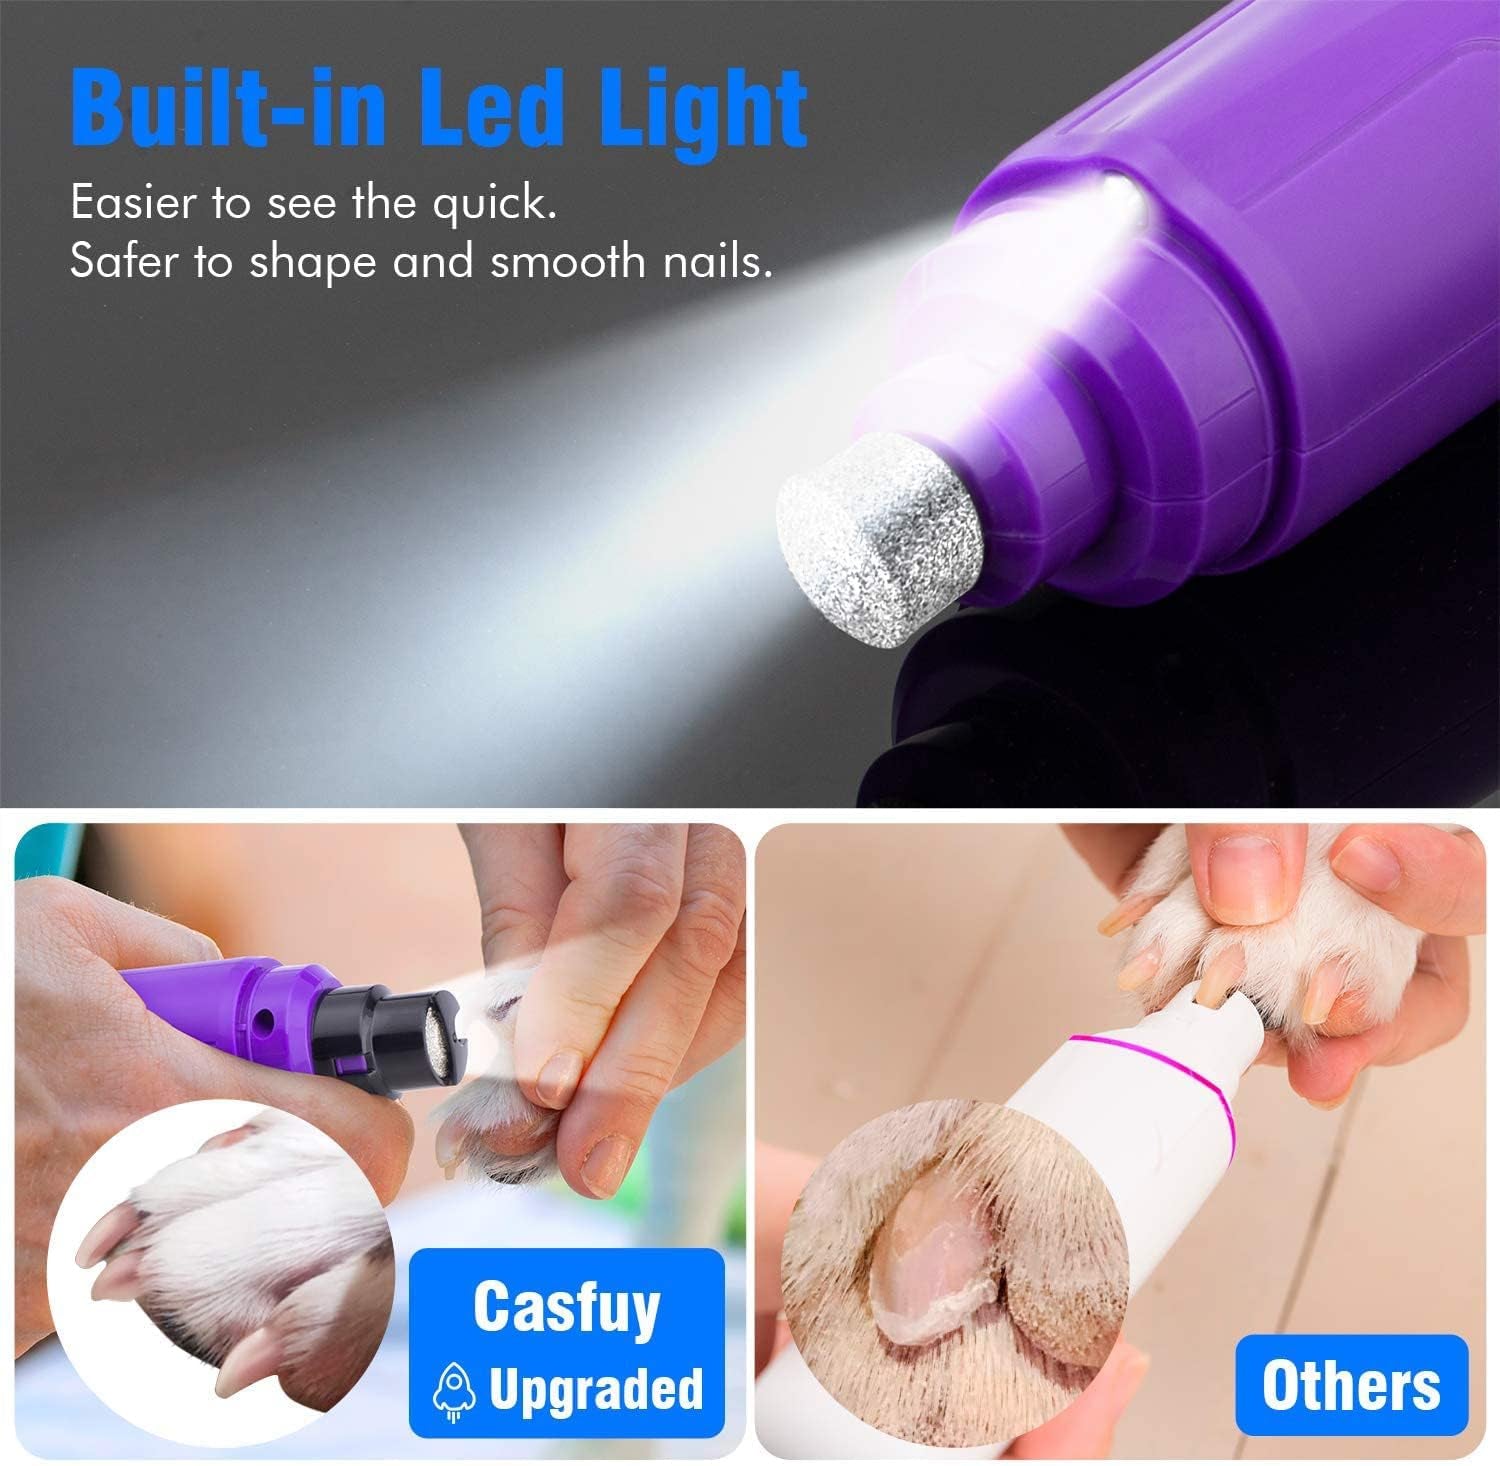 Dog Nail Grinder with LED Light - Upgraded 2-Speed Electric Pet Nail Trimmer Powerful Painless Paws Grooming & Smoothing for Small Medium Large Dogs & Cats (Purple)